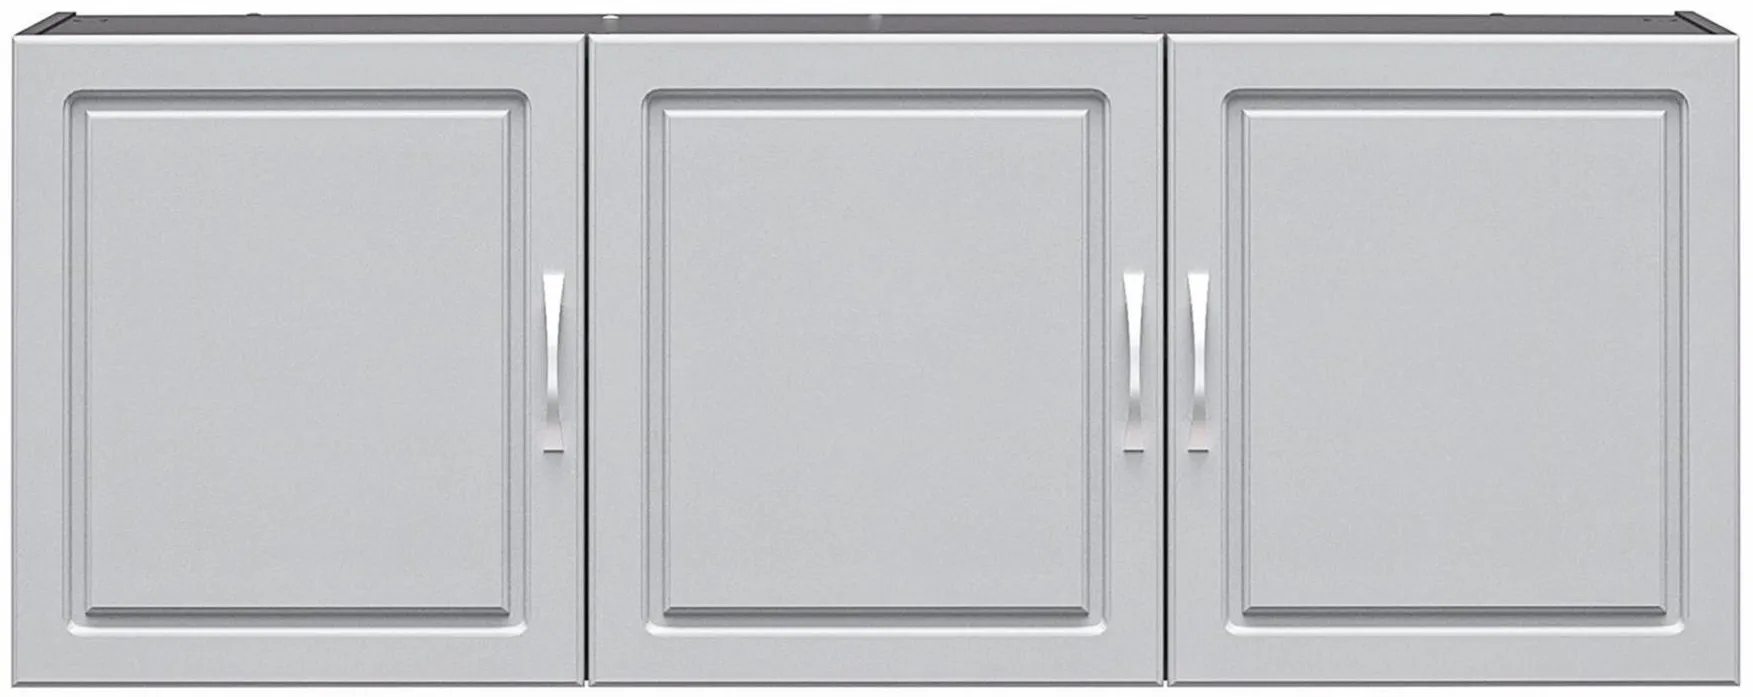 Kendall Wall-Mounted Cupboard in Gray by DOREL HOME FURNISHINGS